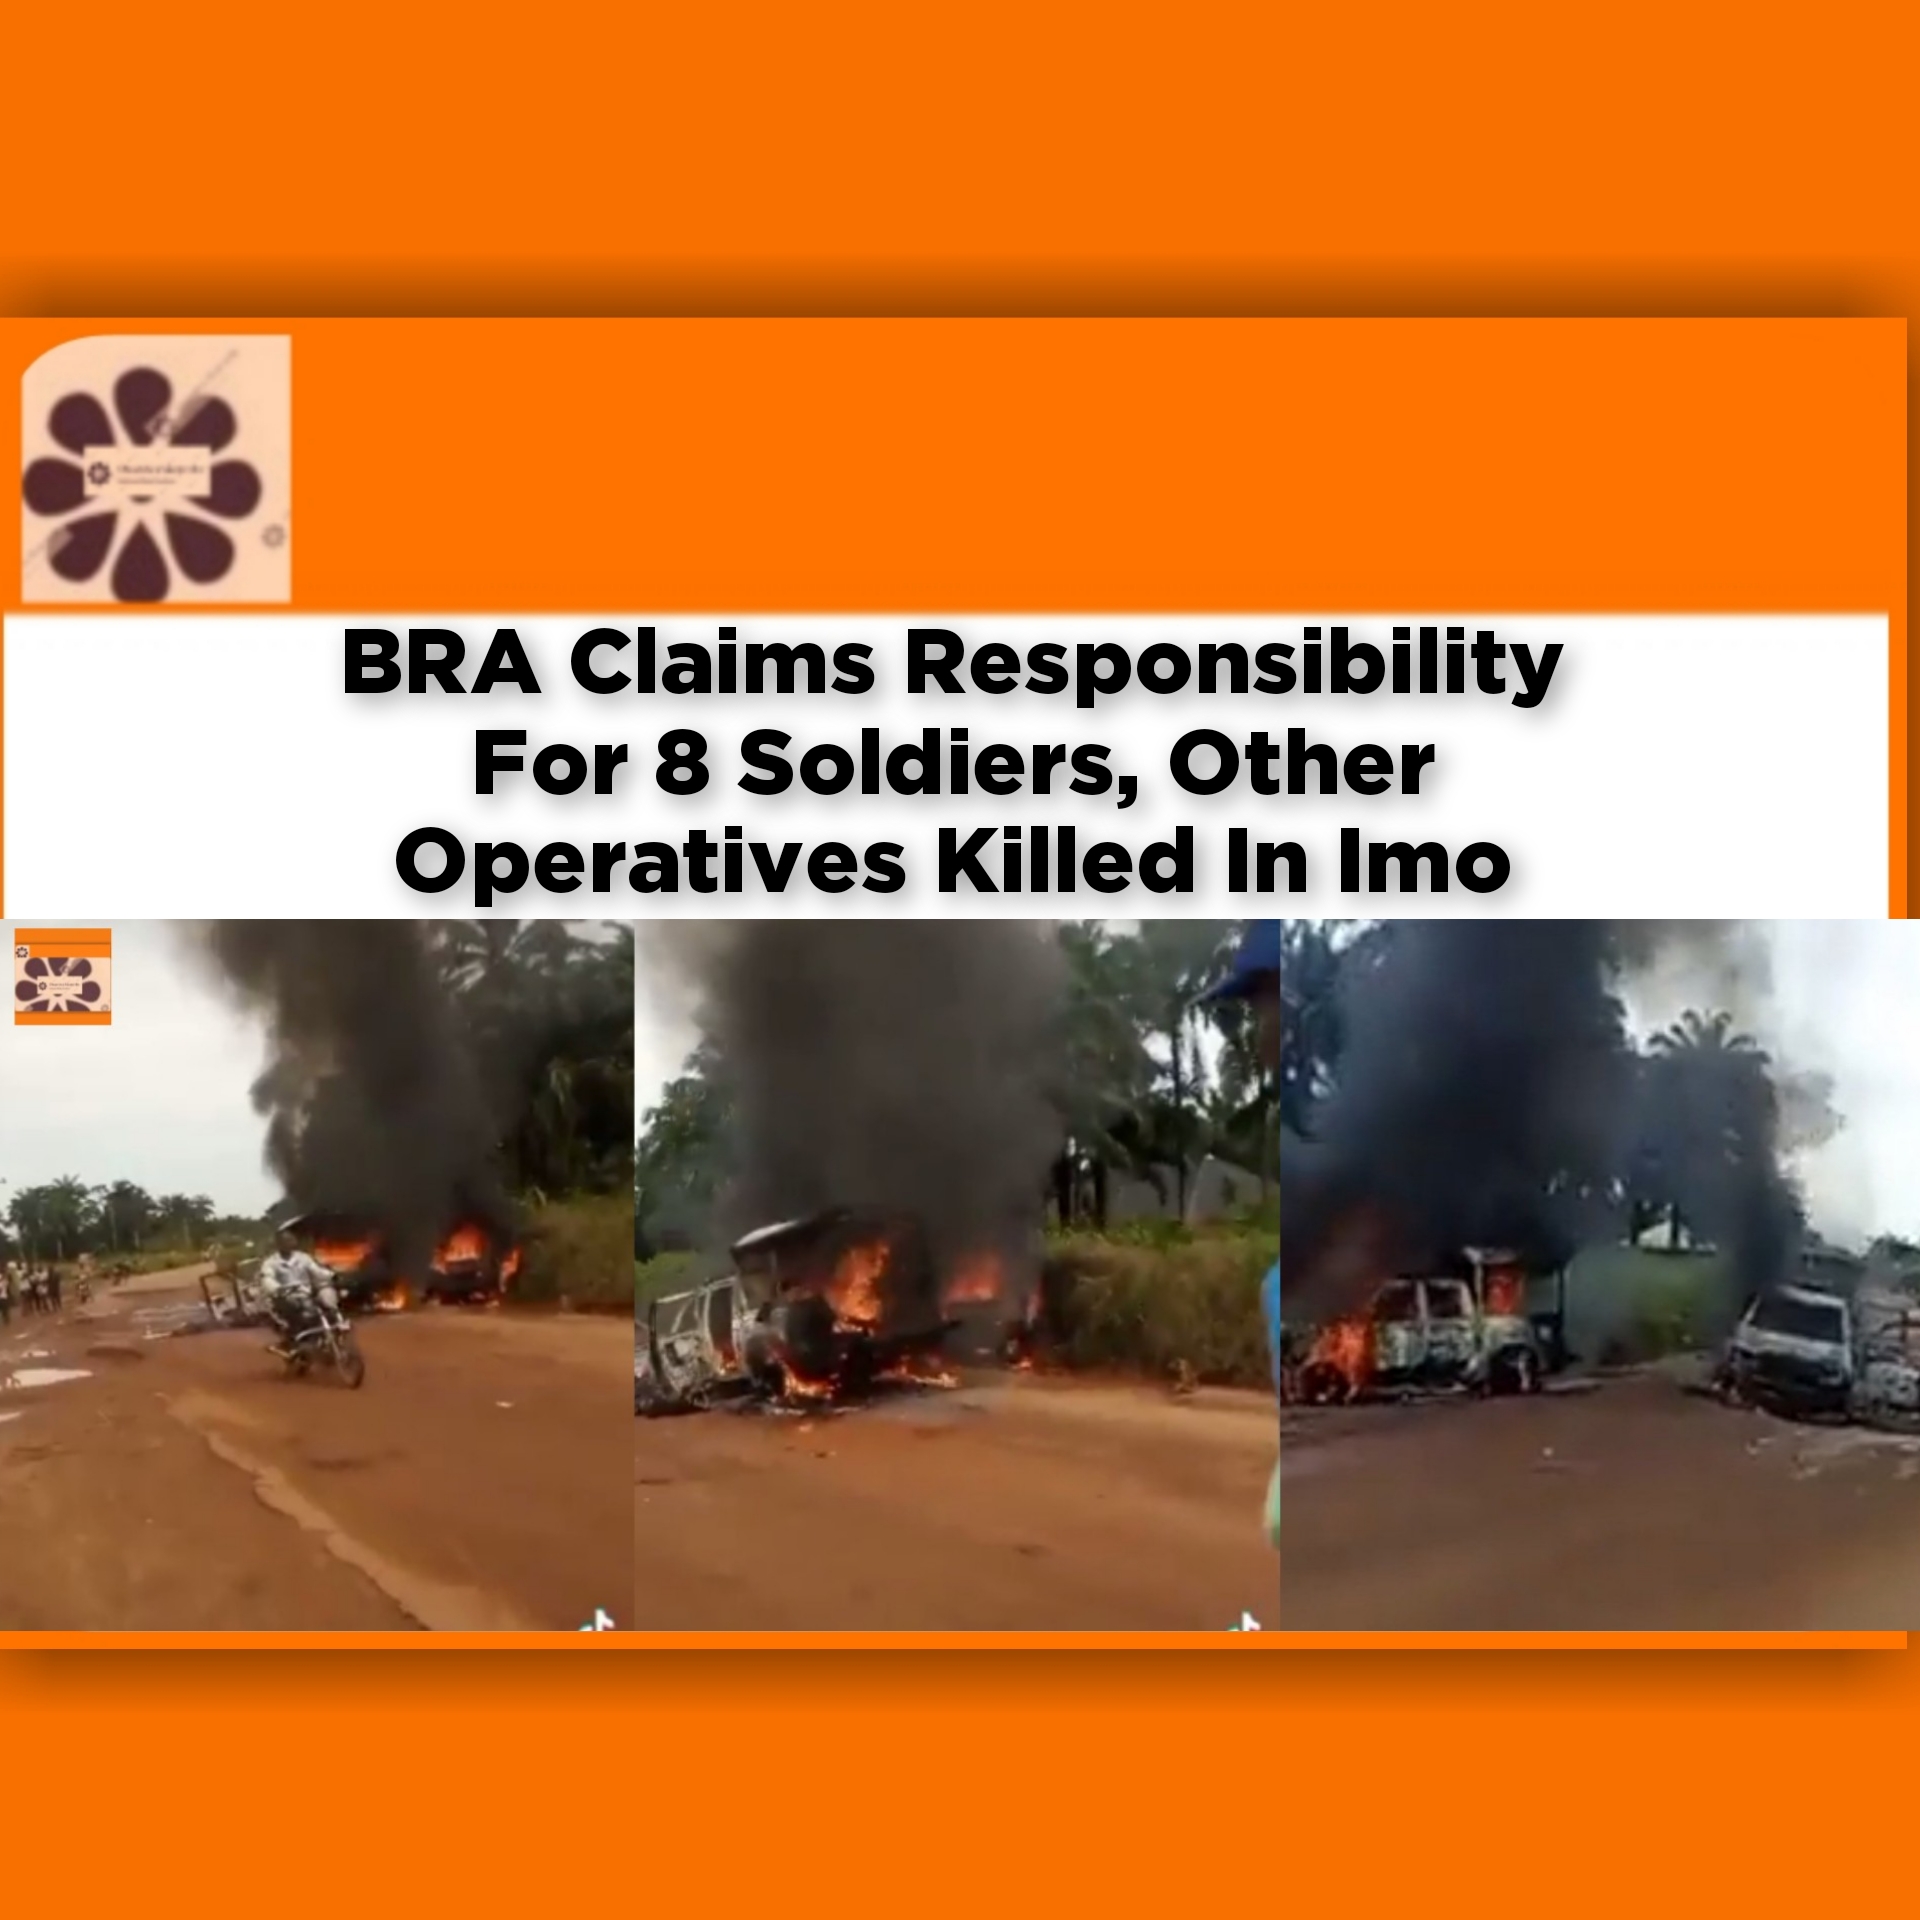 BRA Claims Responsibility For 8 Soldiers, Other Operatives Killed In Imo ~ OsazuwaAkonedo #PDP